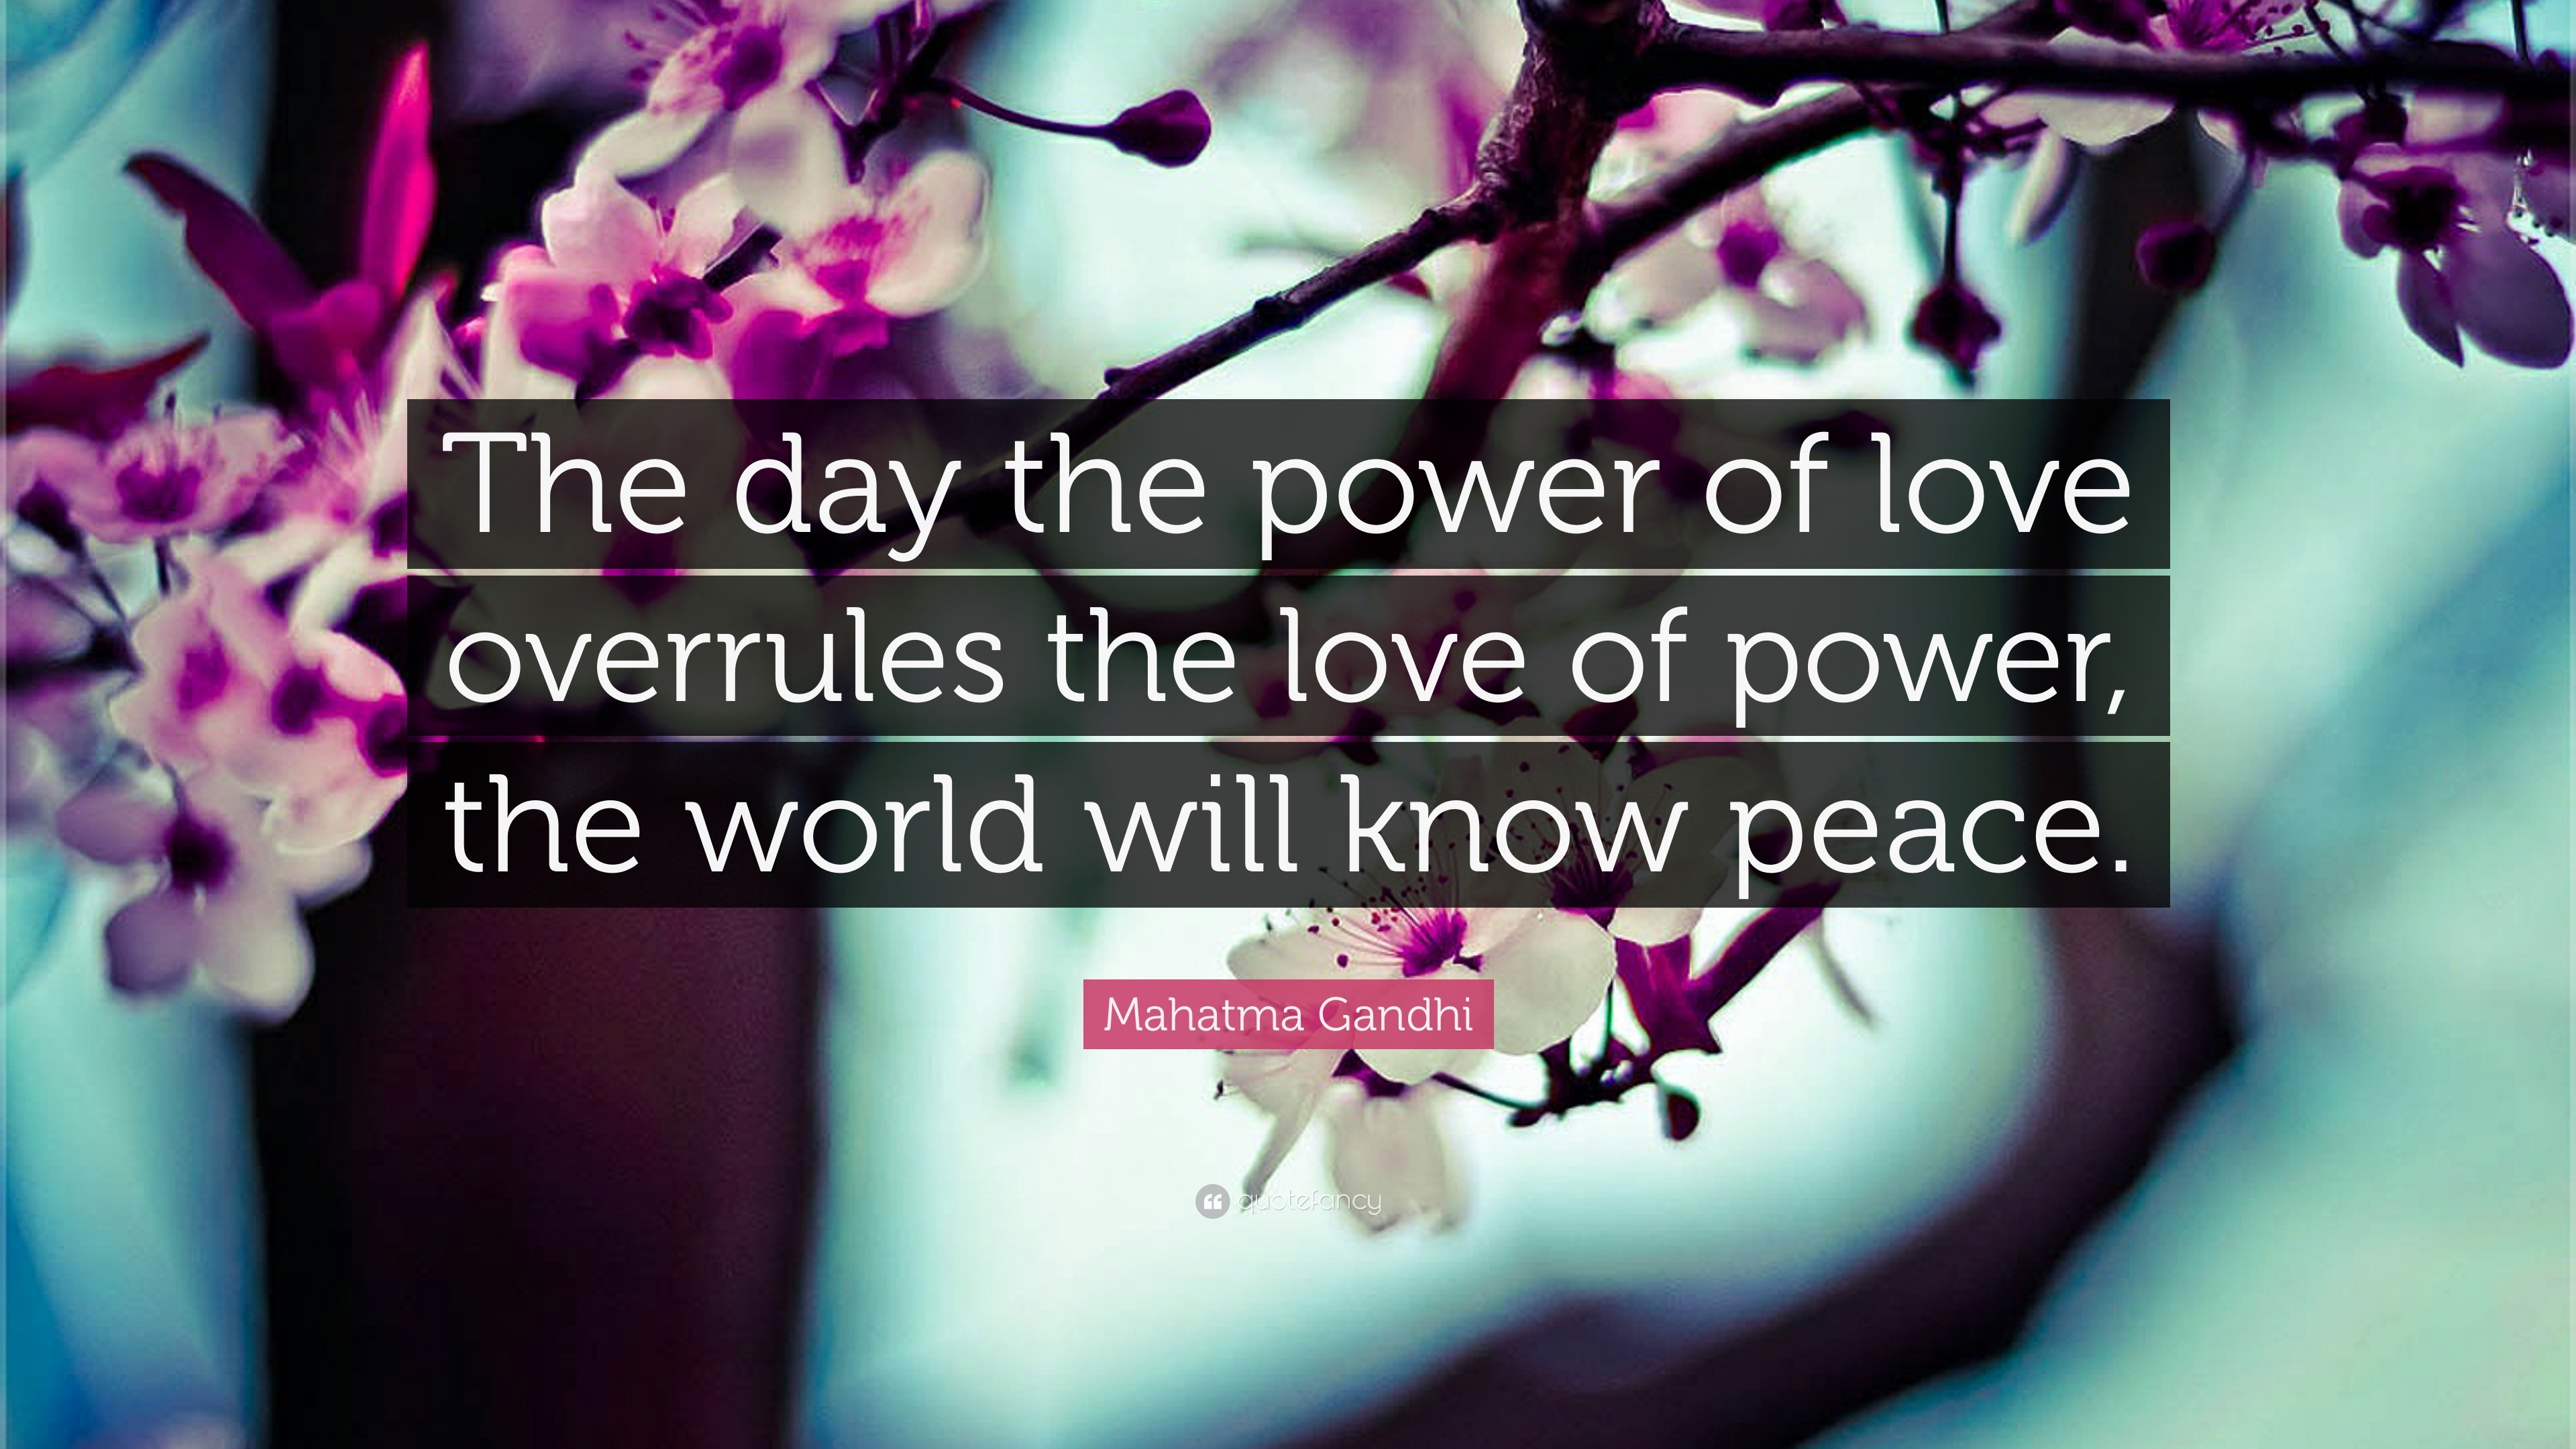 Mahatma Gandhi Quote: “The day the power of love overrules the love of ...